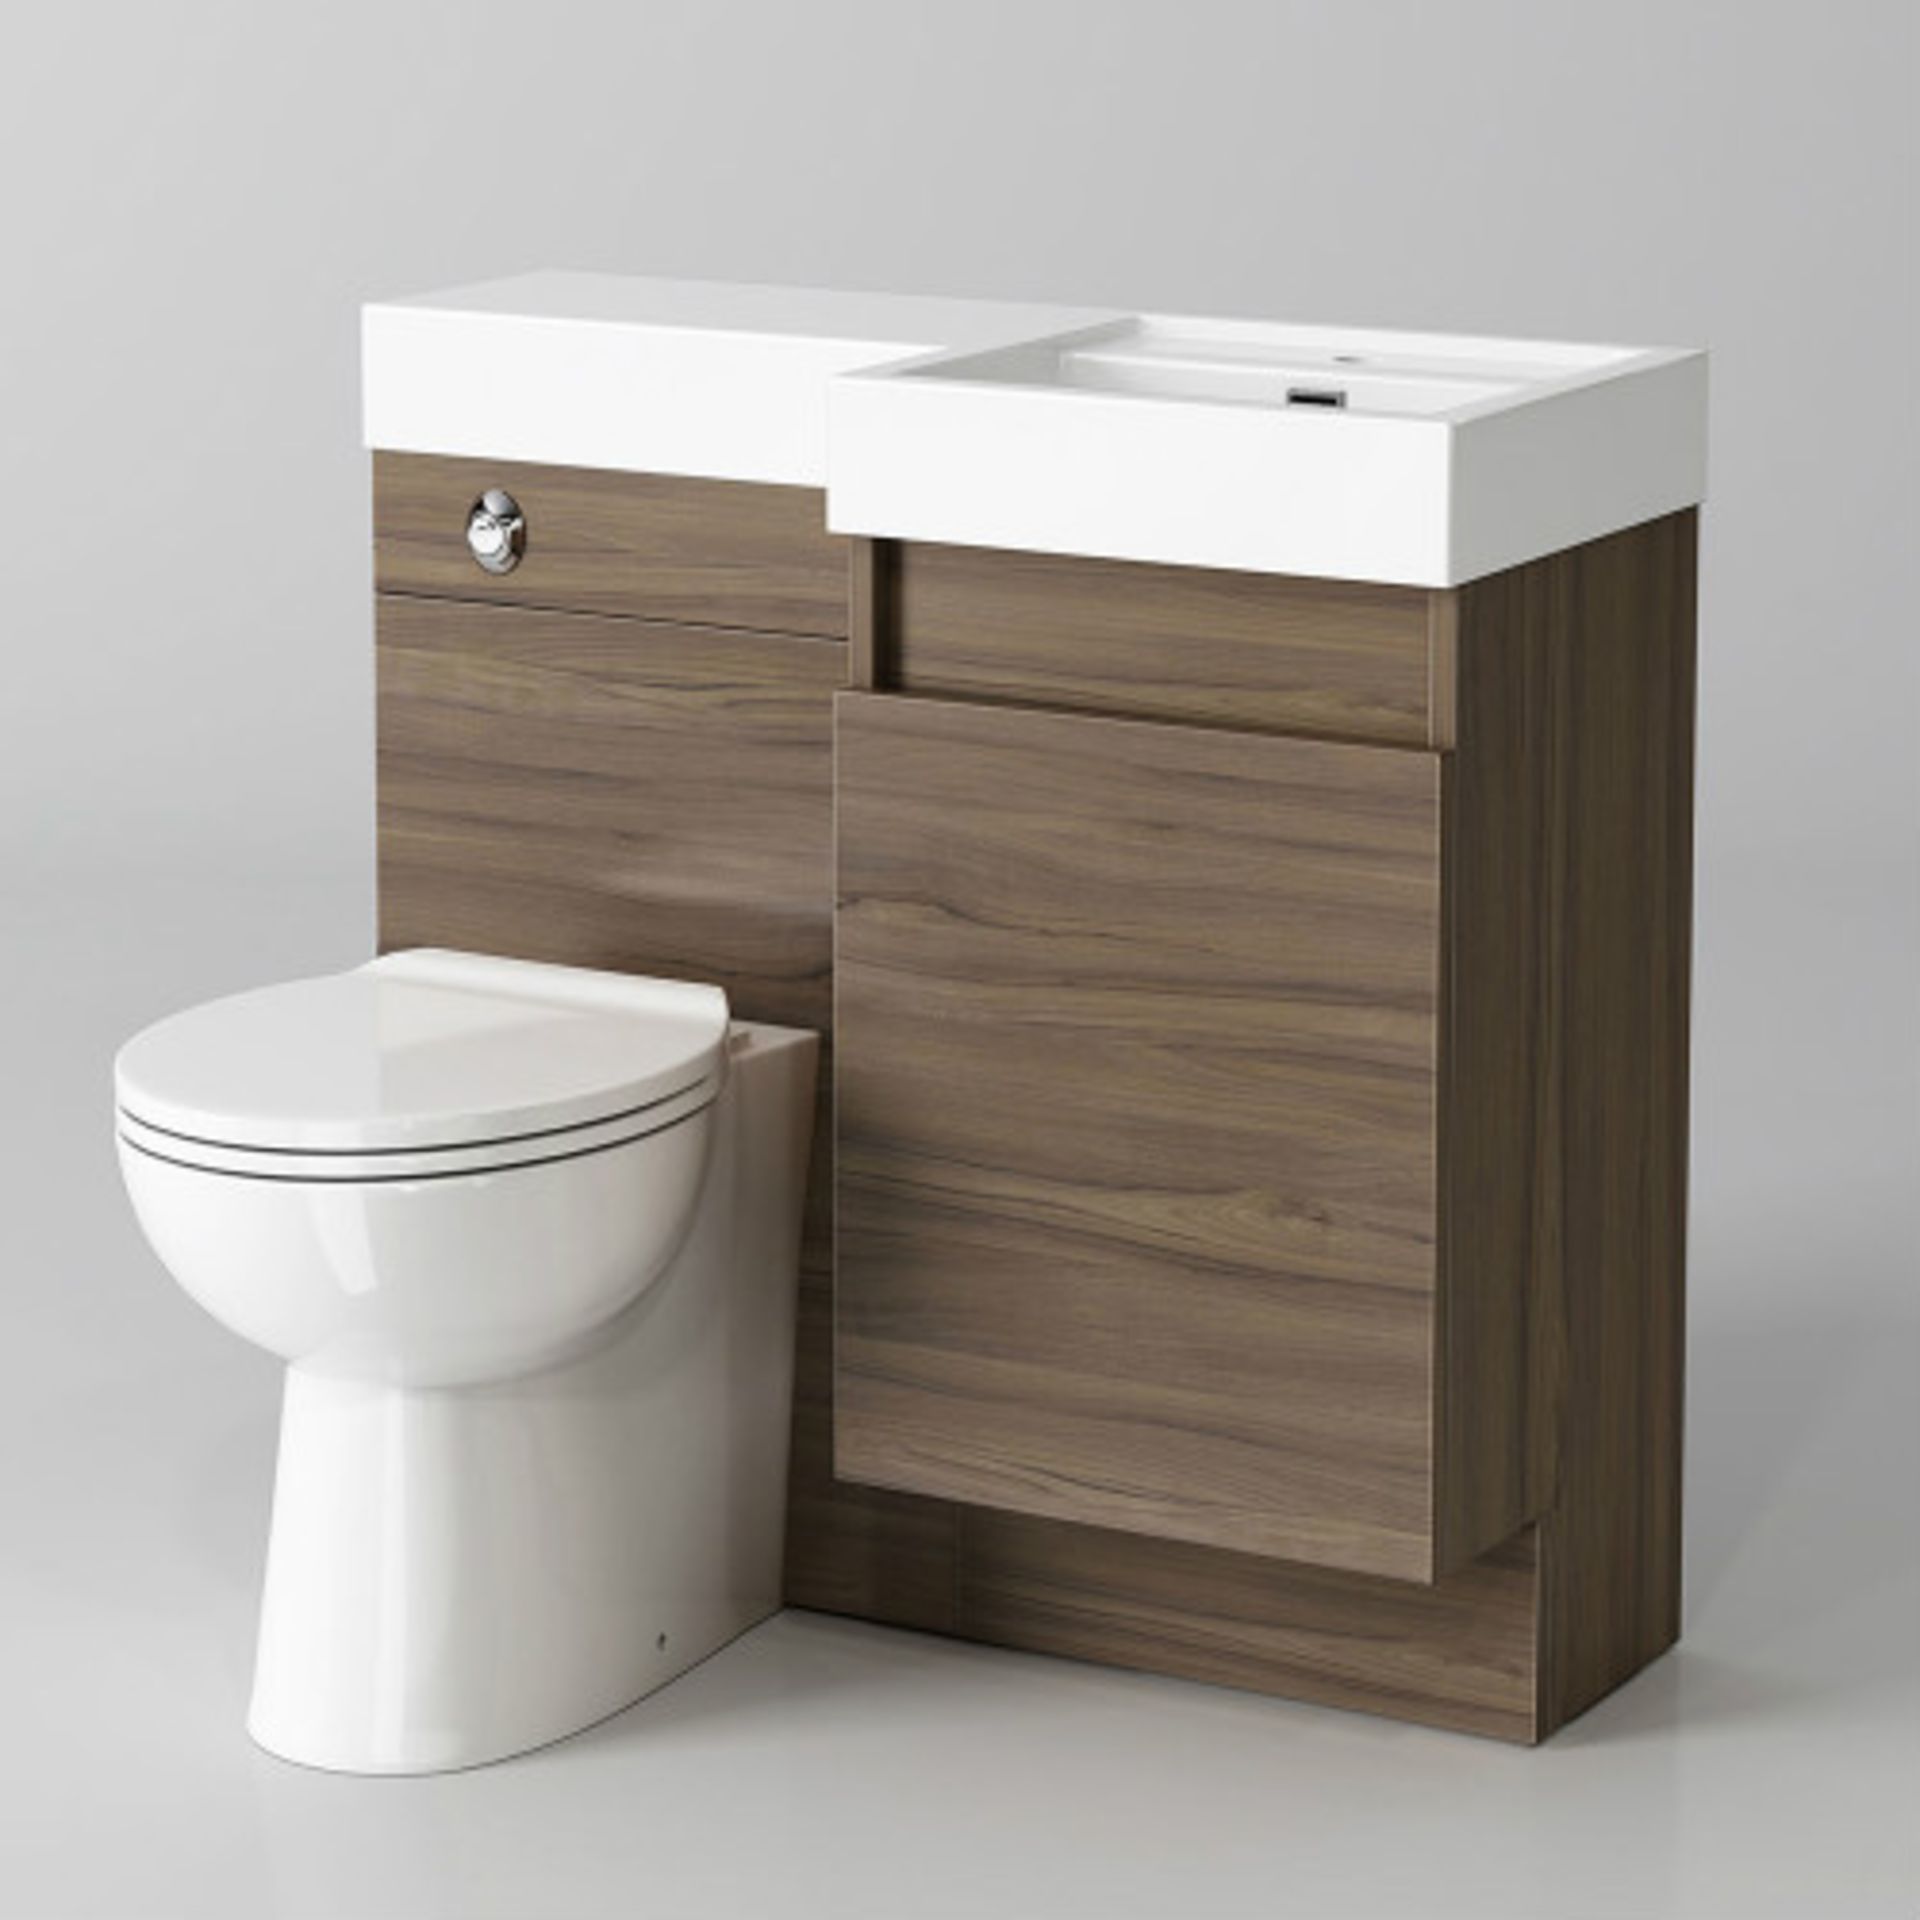 906mm Olympia Walnut Effect Drawer Vanity Unit Right with Quartz Pan. RRP £999.99. Comes compl... - Image 5 of 5